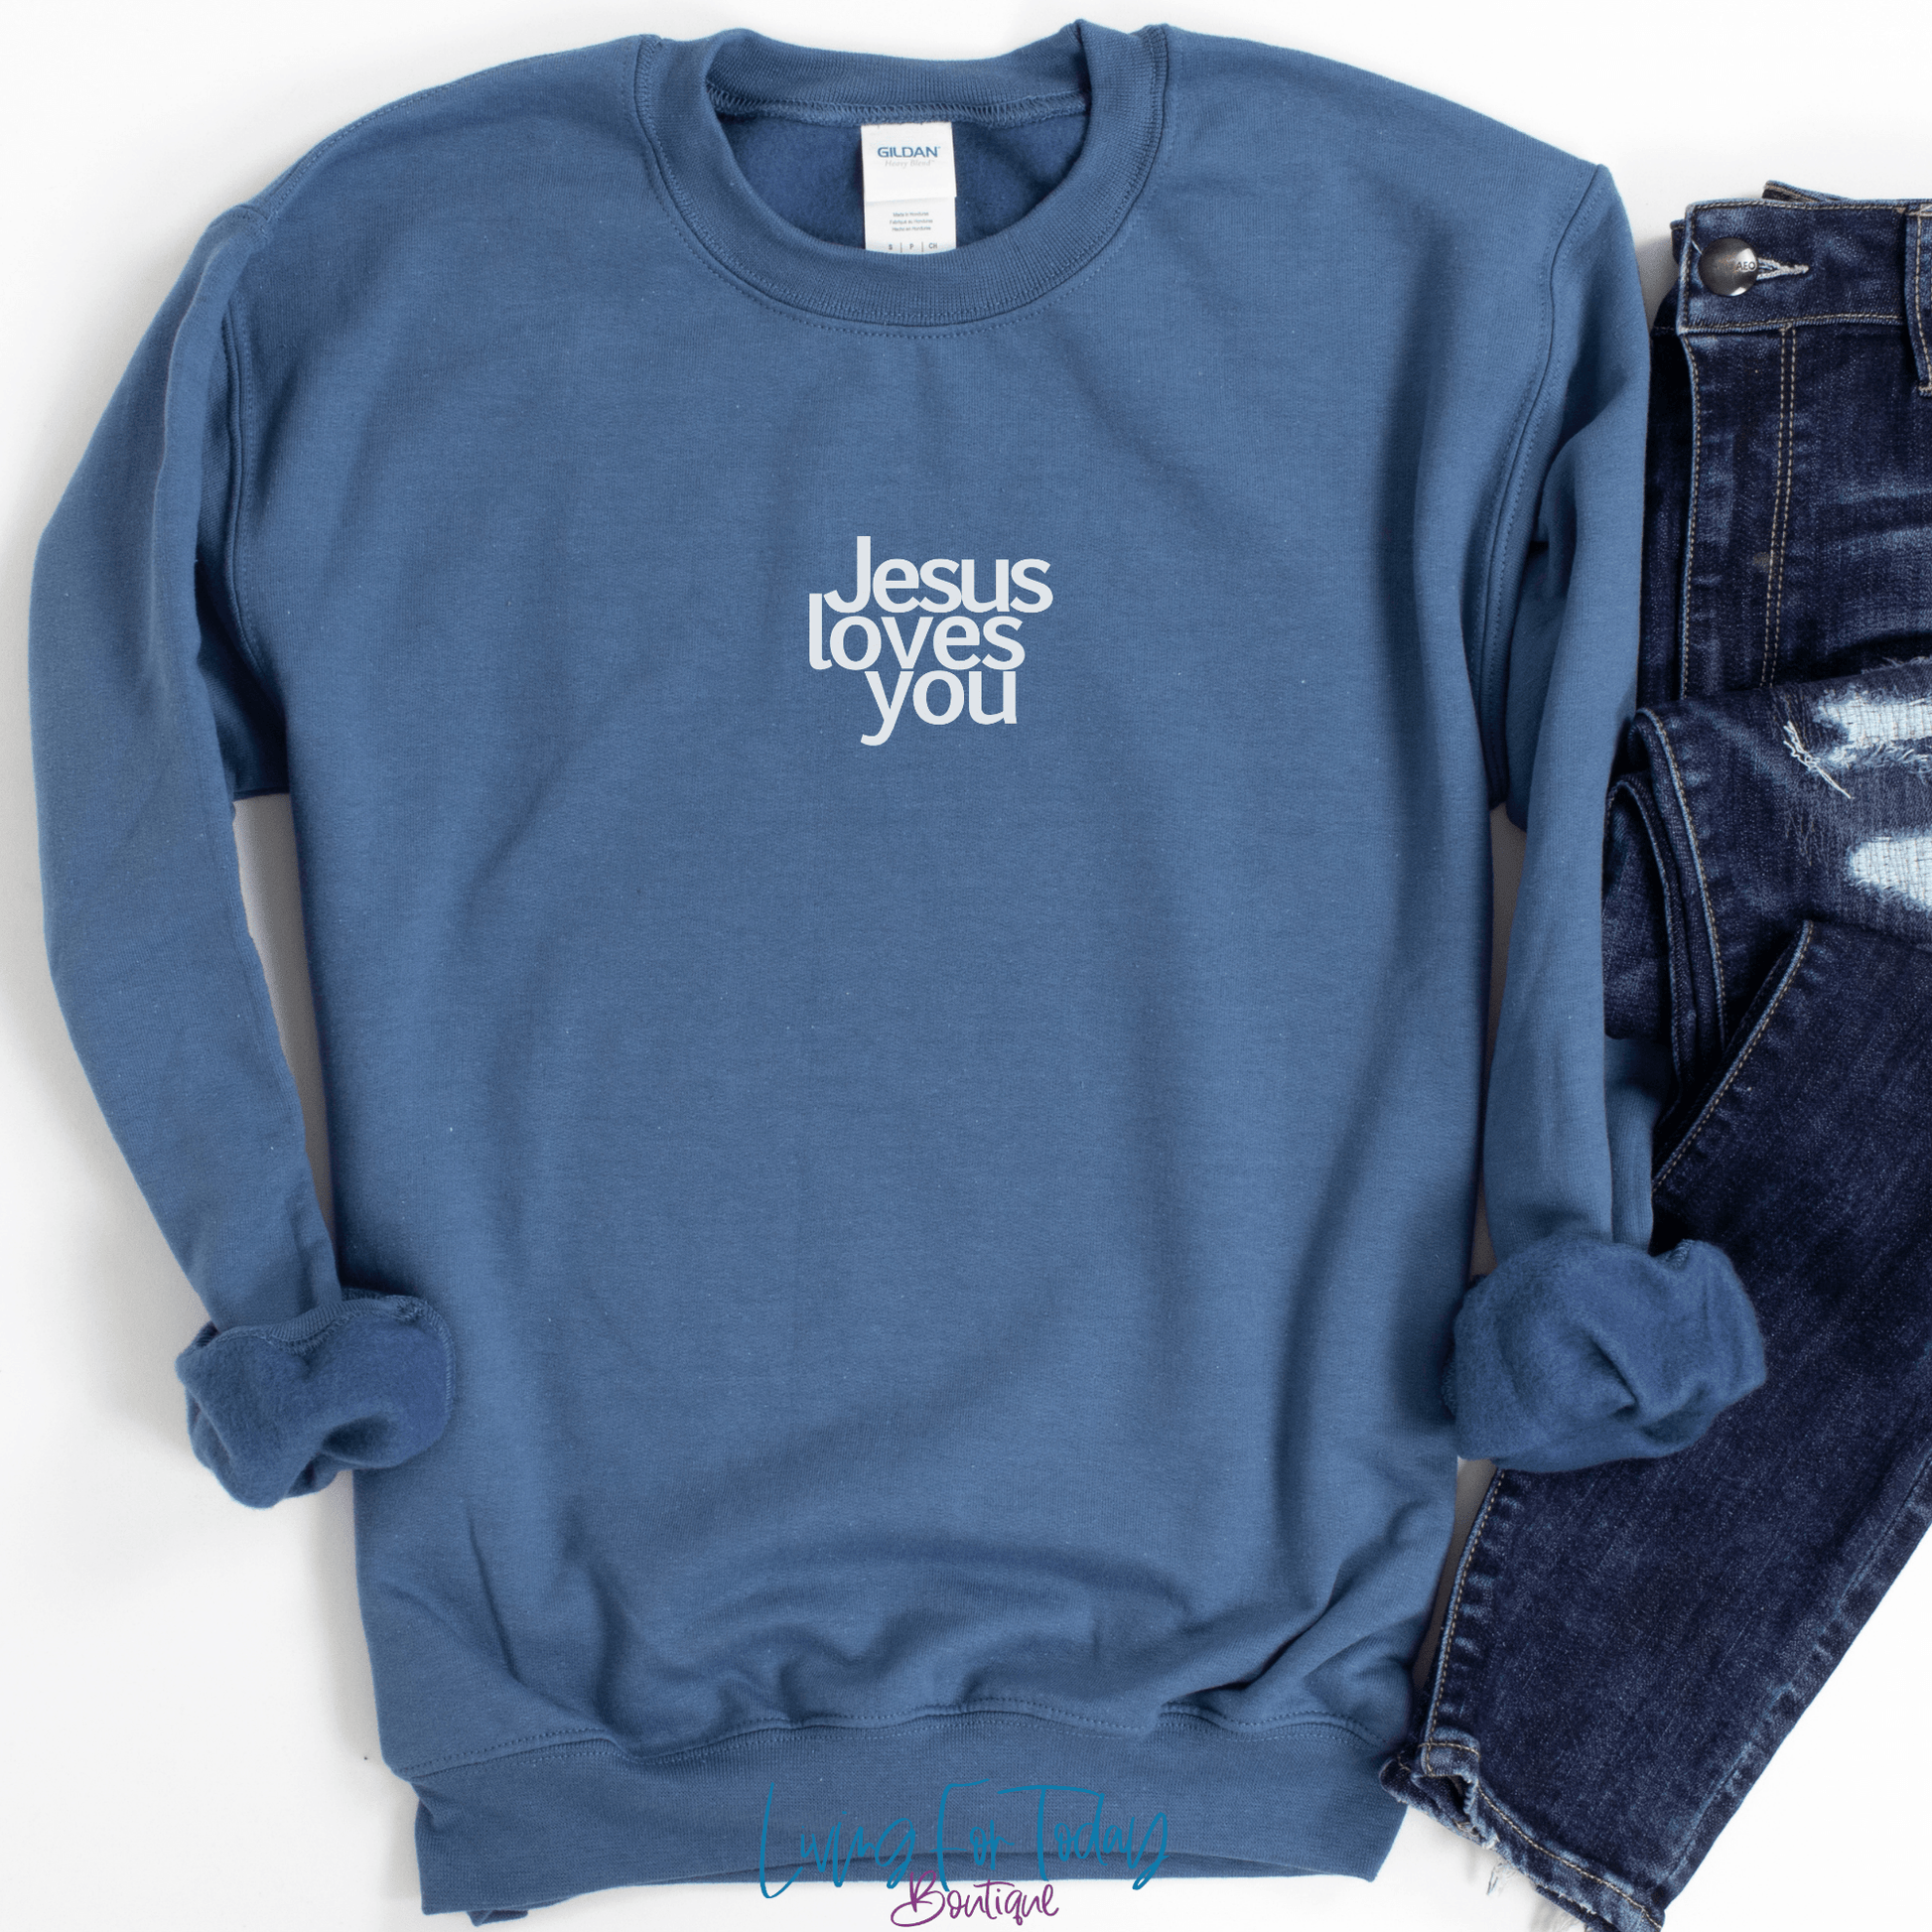 Embroided Jesus Loves You Sweatshirt